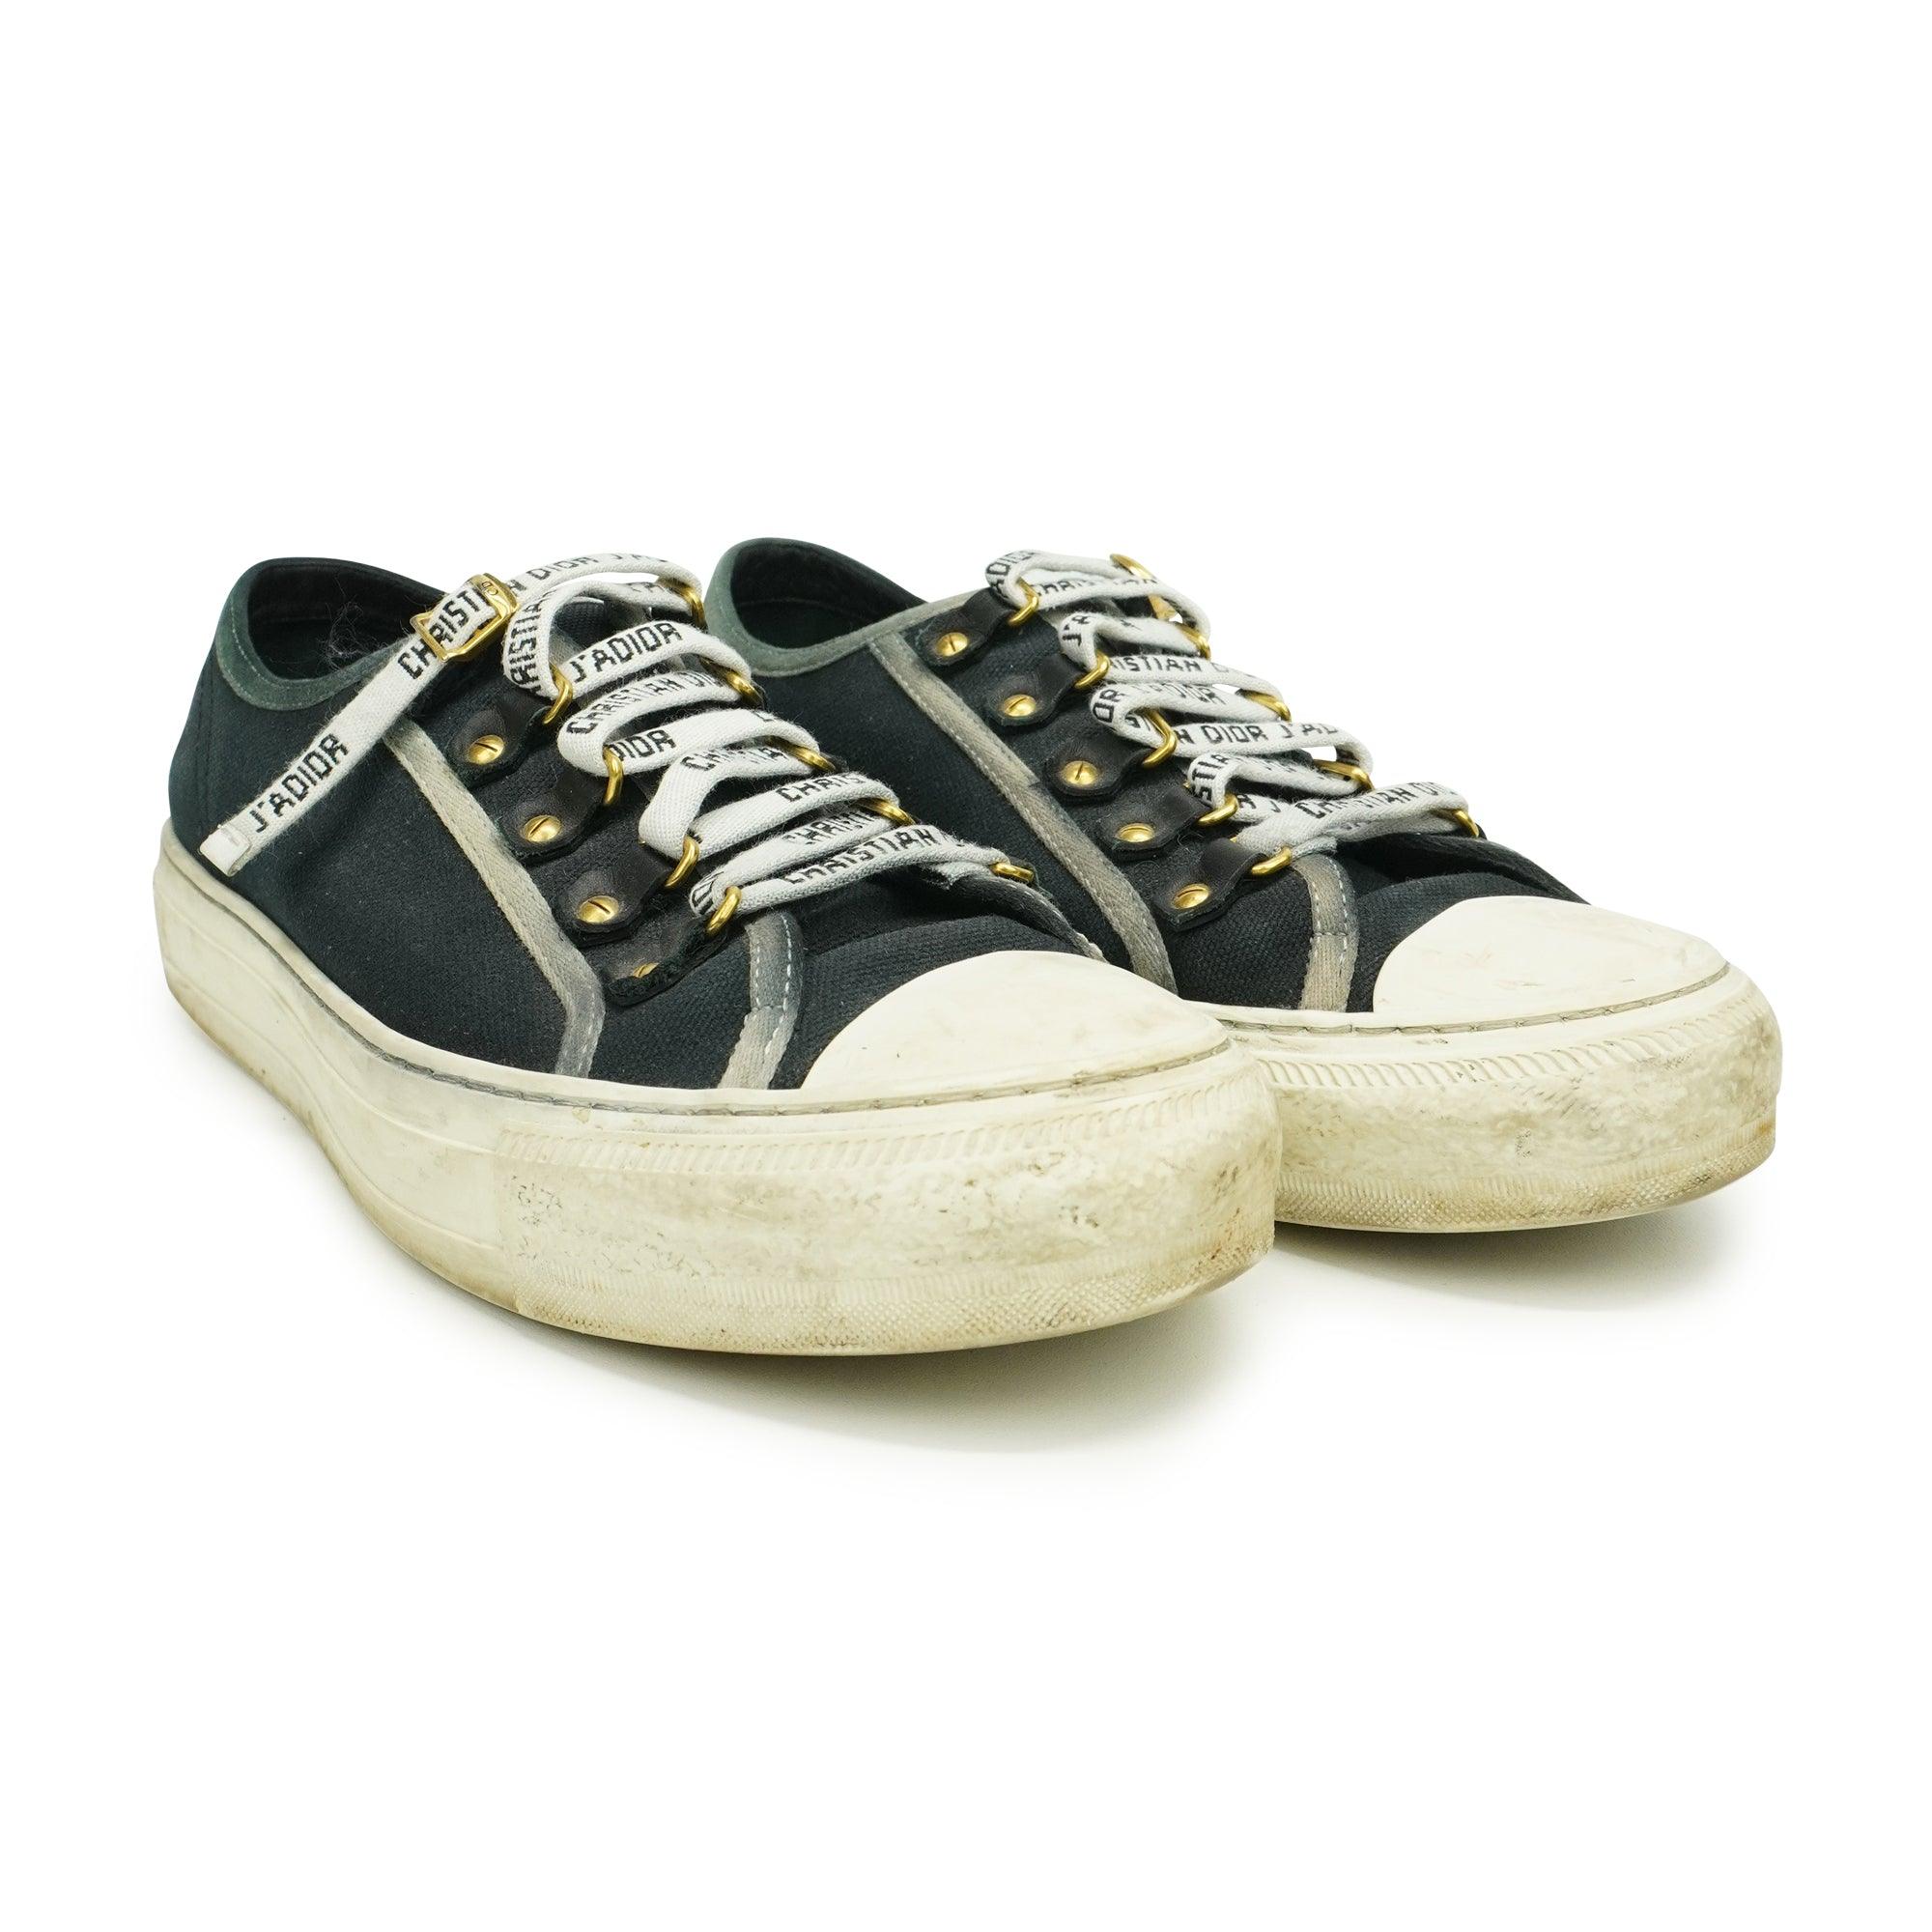 Christian Dior Sneakers - Women's 39 - Fashionably Yours